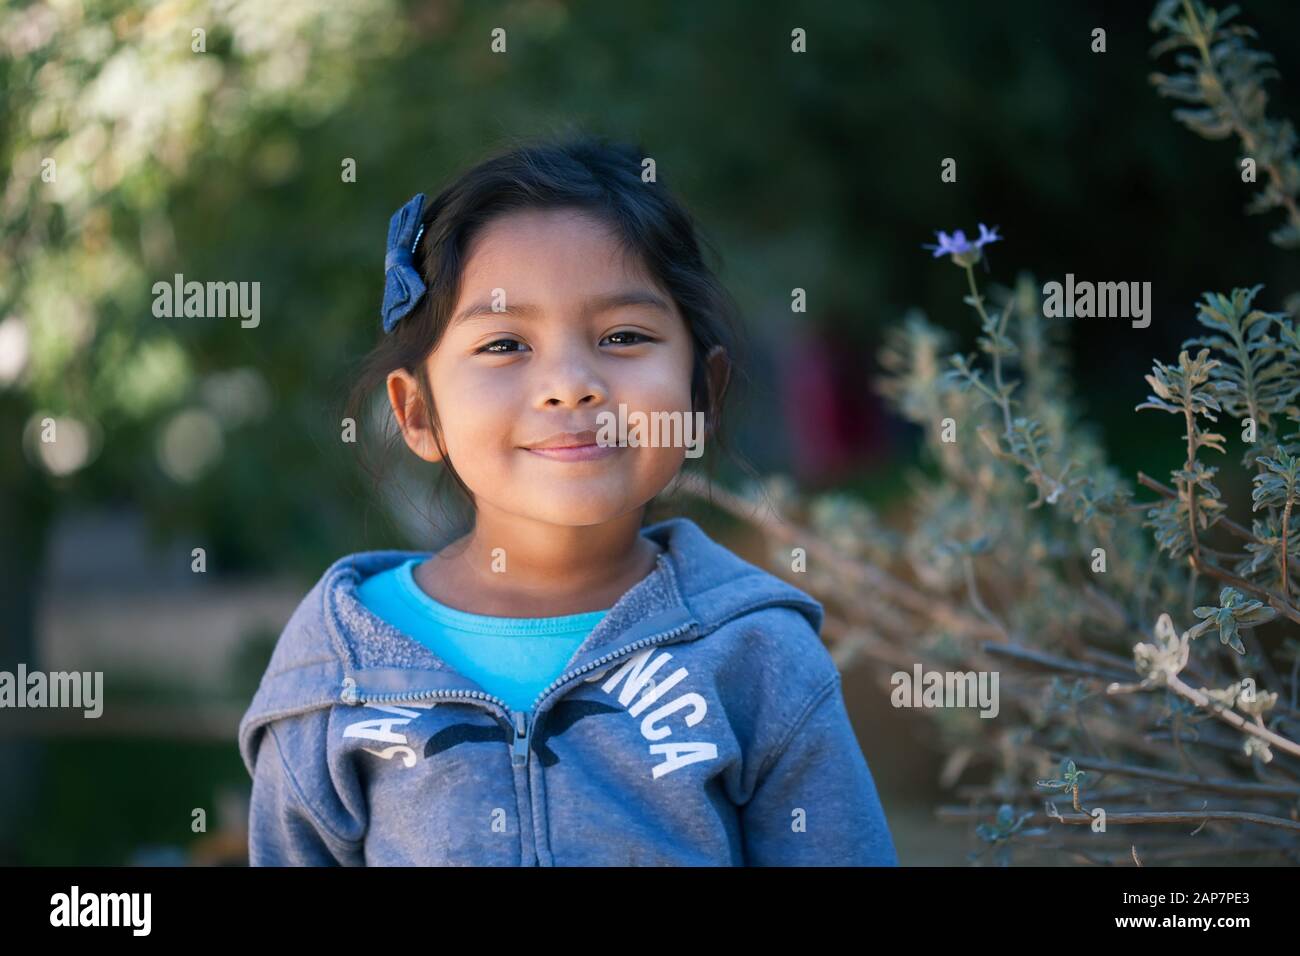 Confident little girl wearing a sweater, standing in front of trees and green plants with a sincere smile on her face. Stock Photo